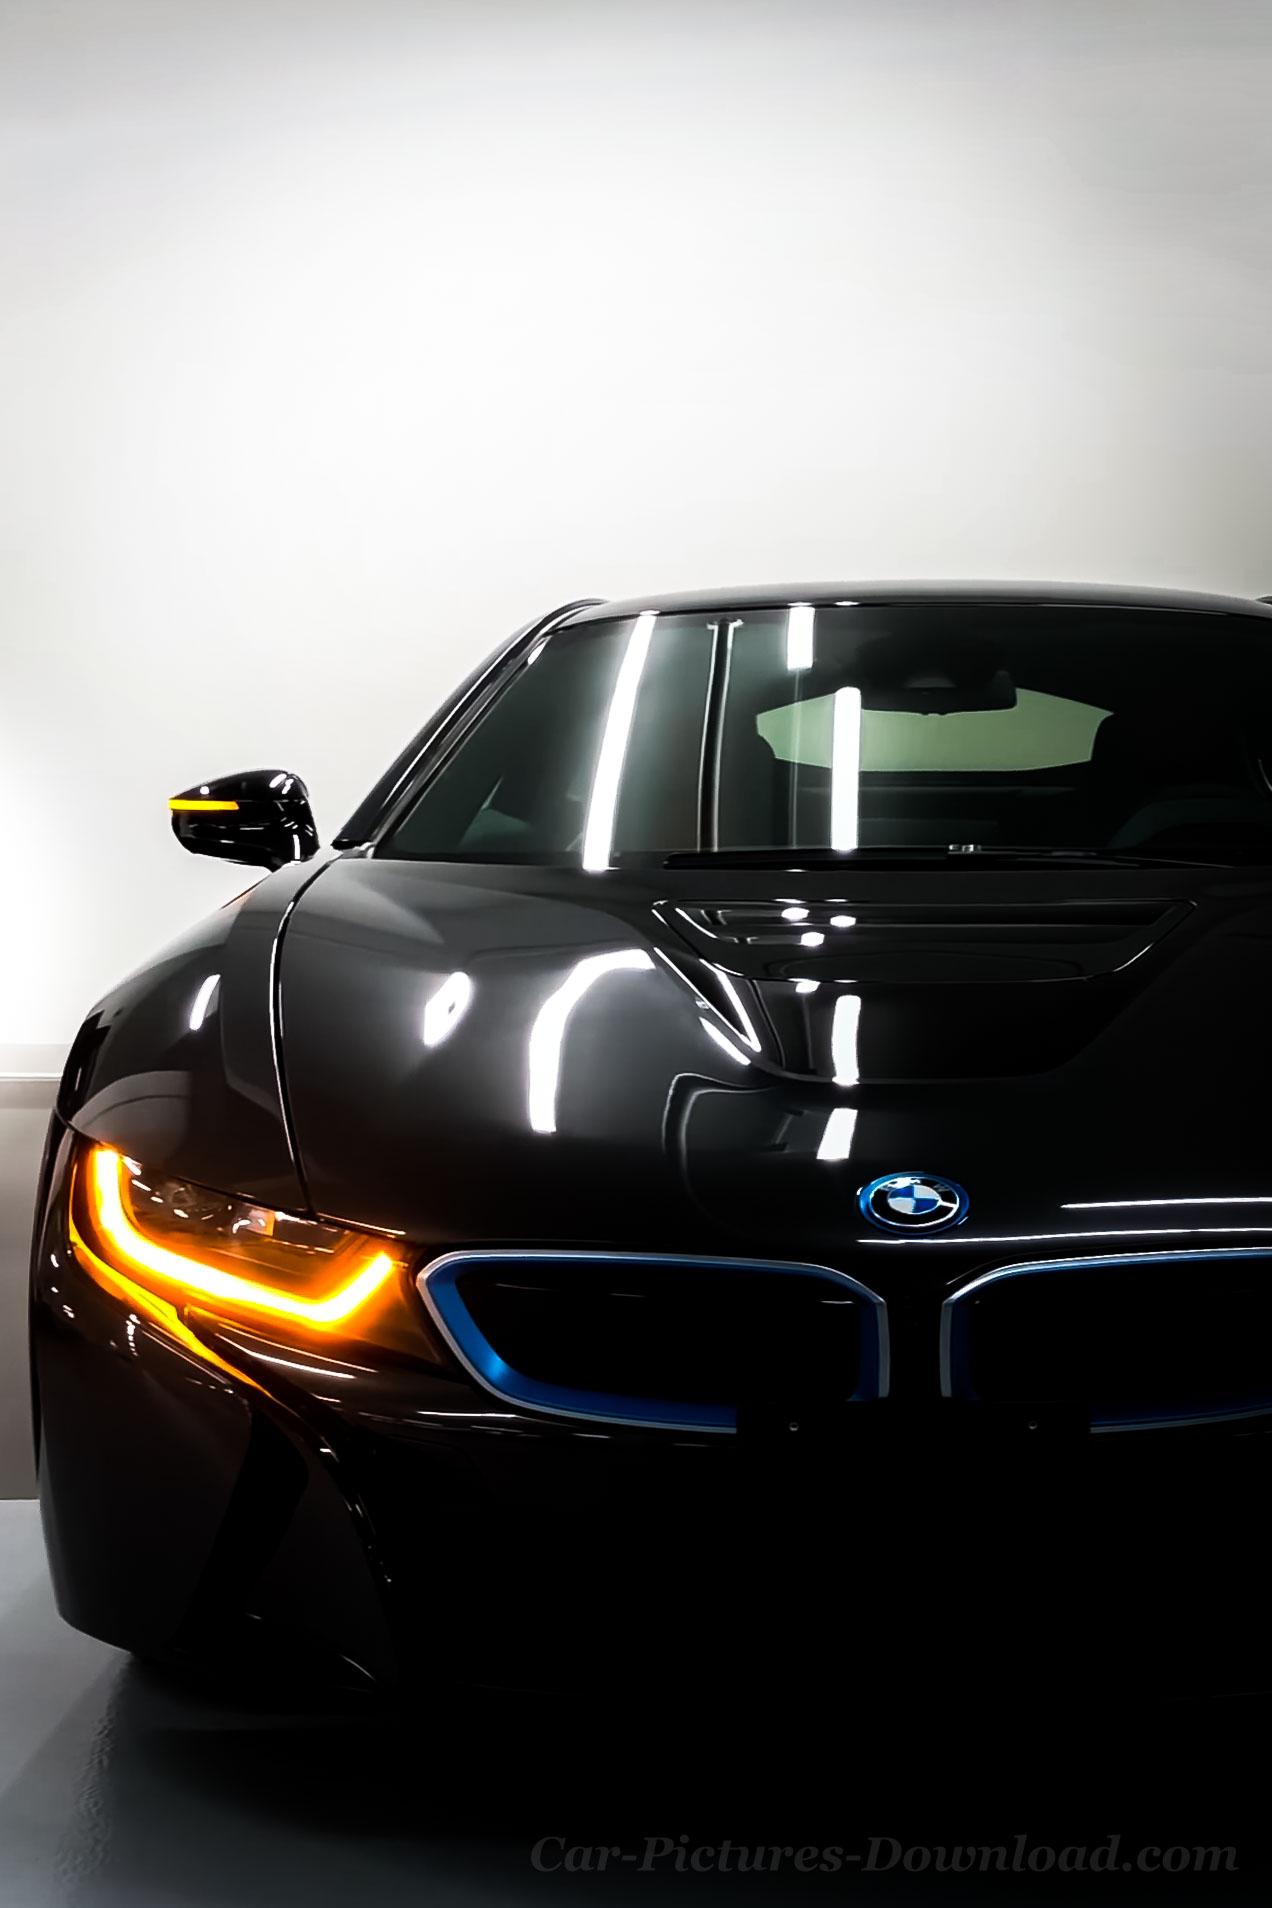 BMW Wallpaper Picture HD For All Devices Image Download